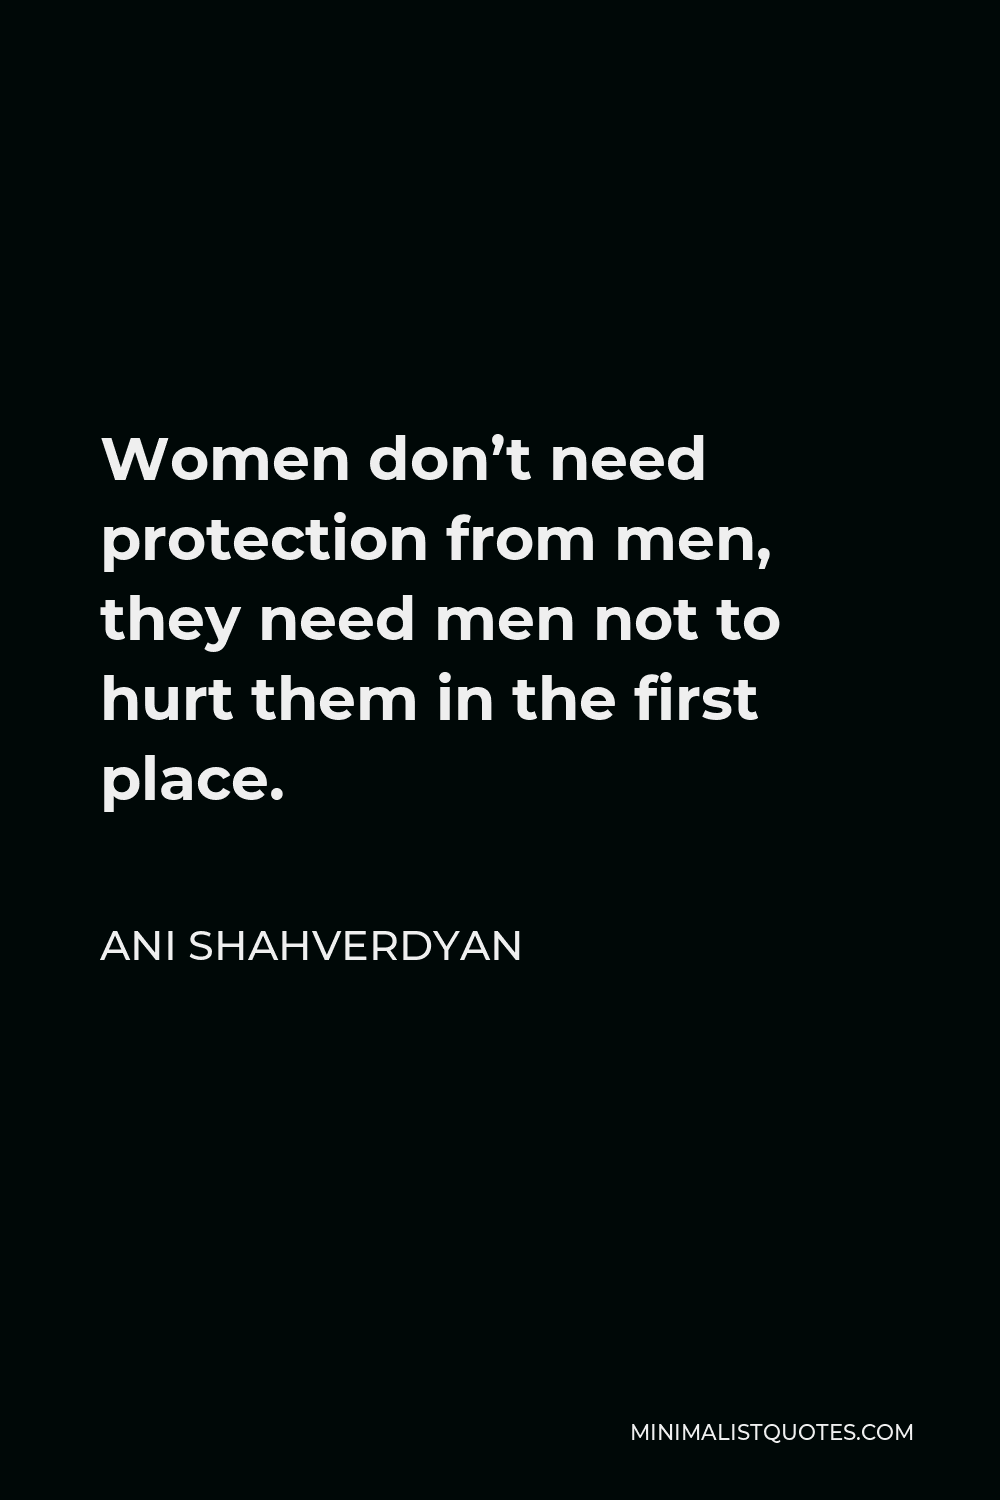 Ani Shahverdyan Quote - Women don’t need protection from men, they need men not to hurt them in the first place.